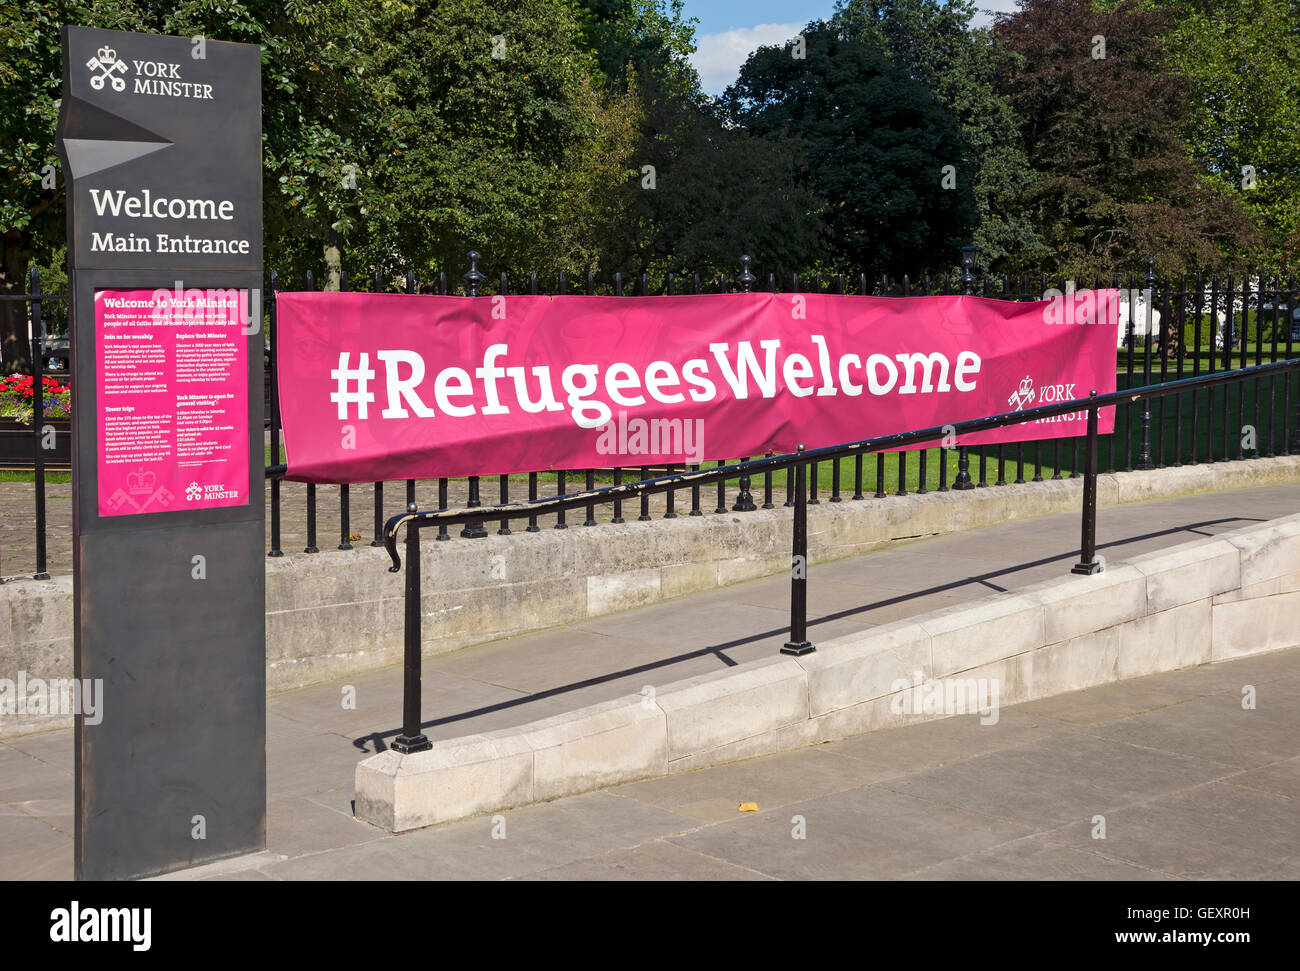 Refugees welcome banner outside the minster in York. Stock Photo